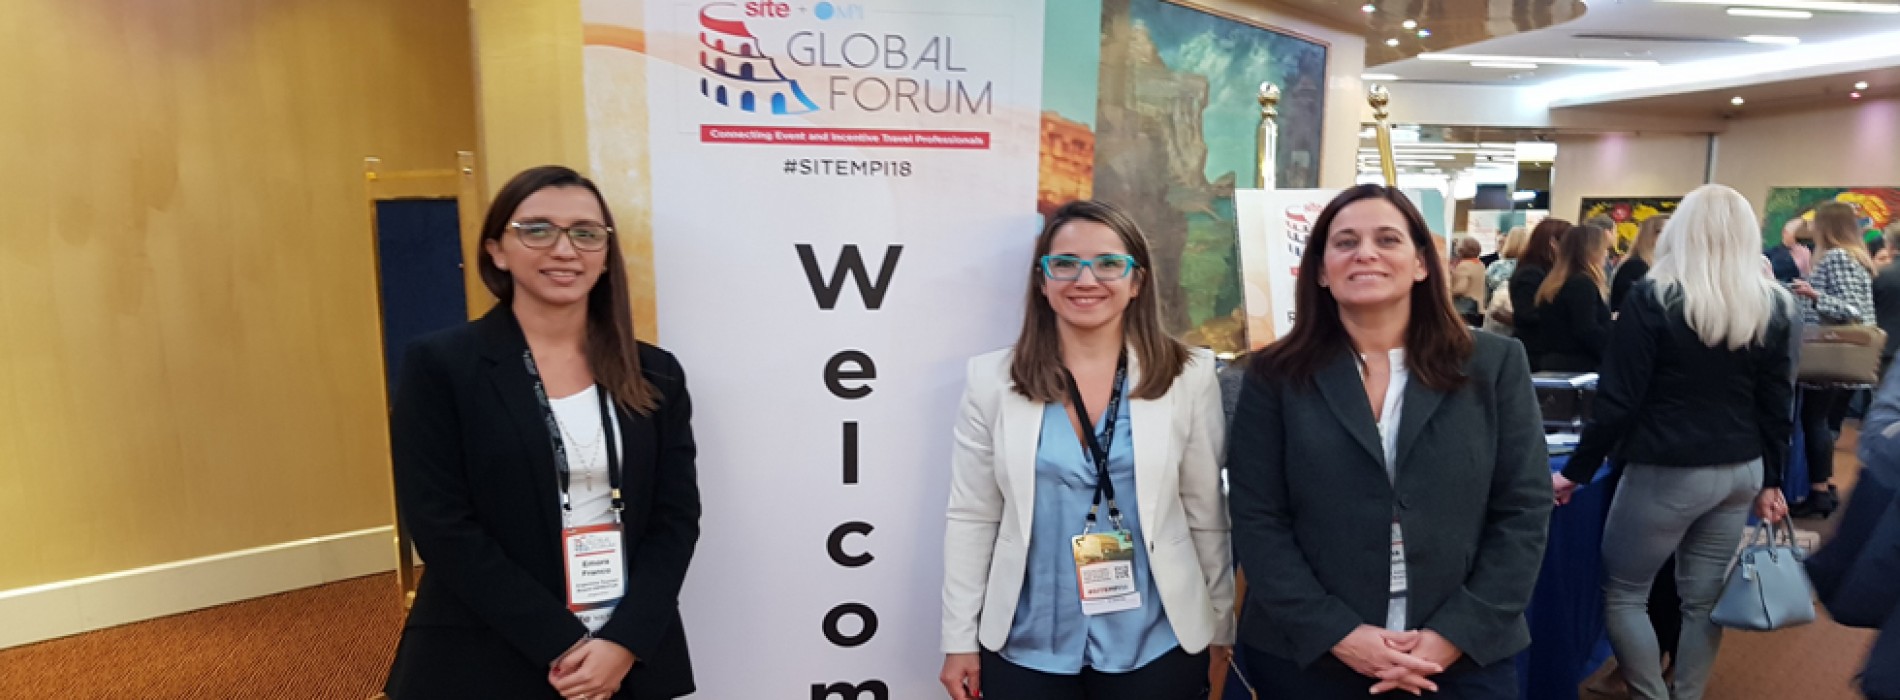 Argentina present at the Global Conference SITE